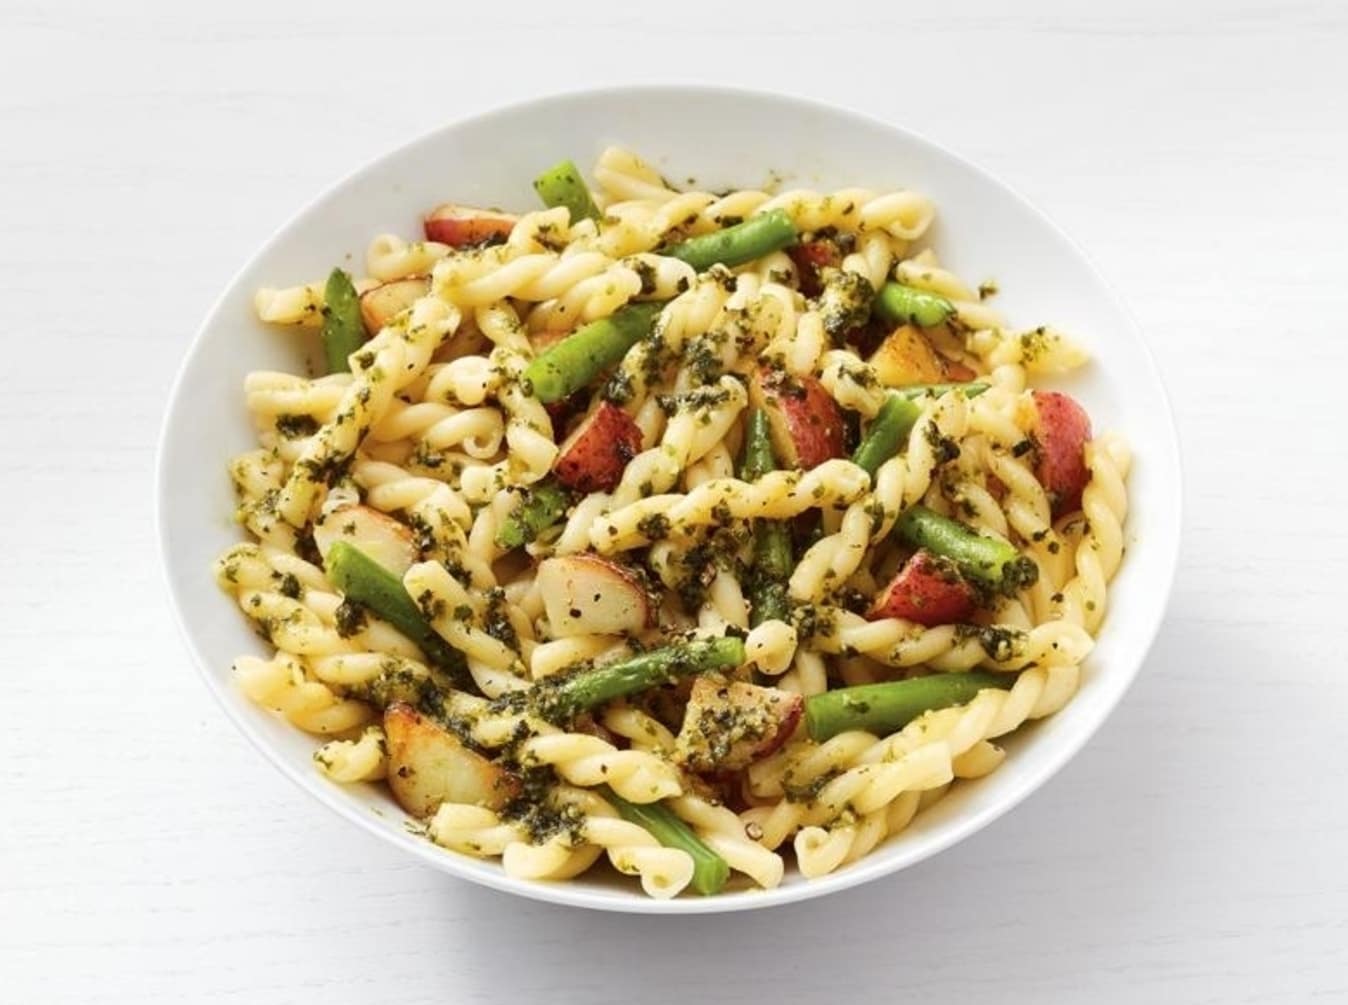 Gemelli with Pesto, Potatoes and Green Beans